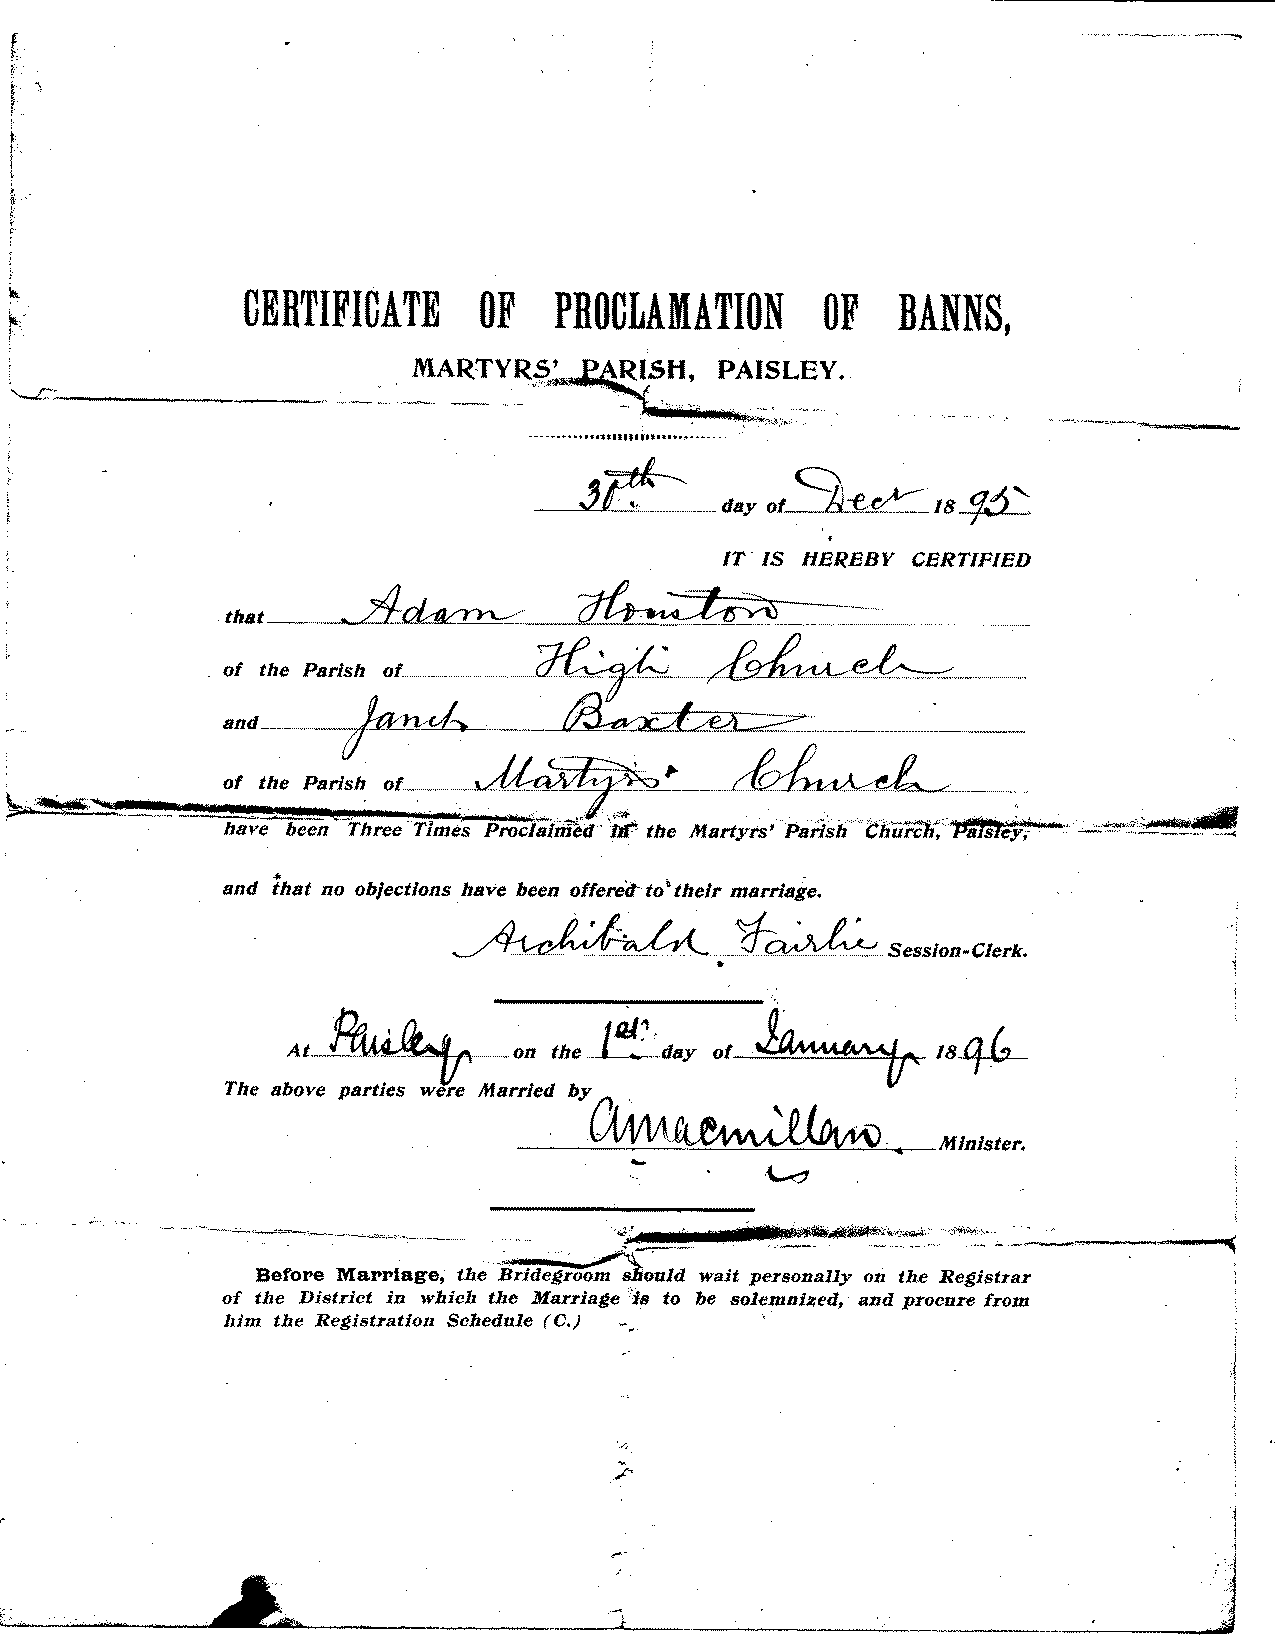 Houston-Baxter Certificate of Proclamation of Banns